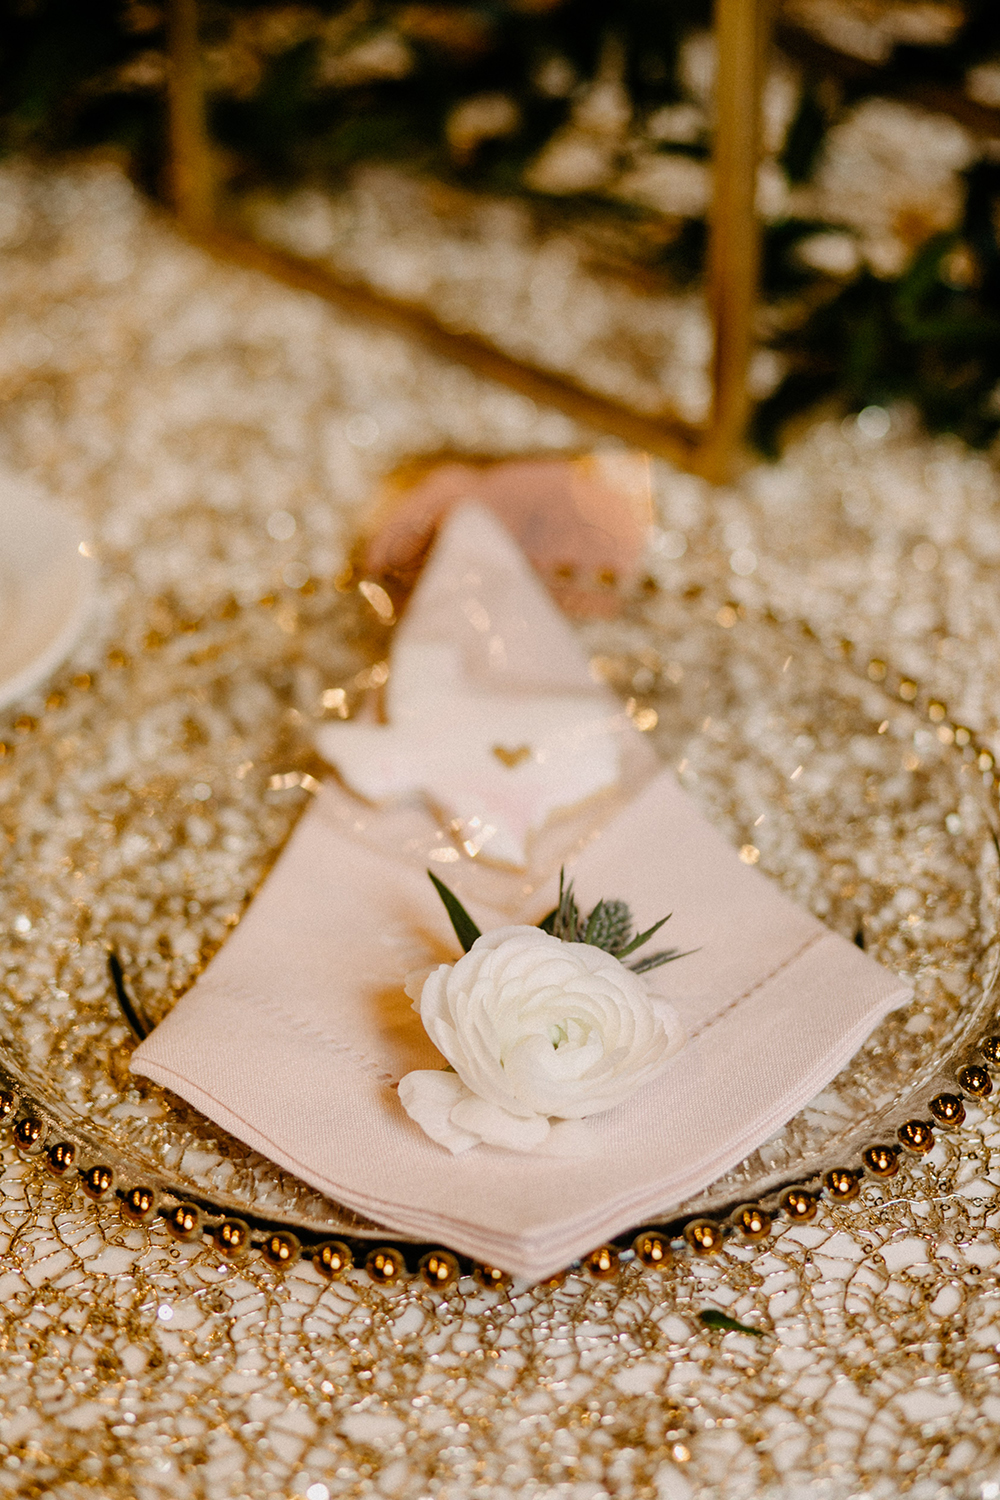 reception decor - table settings - table accents